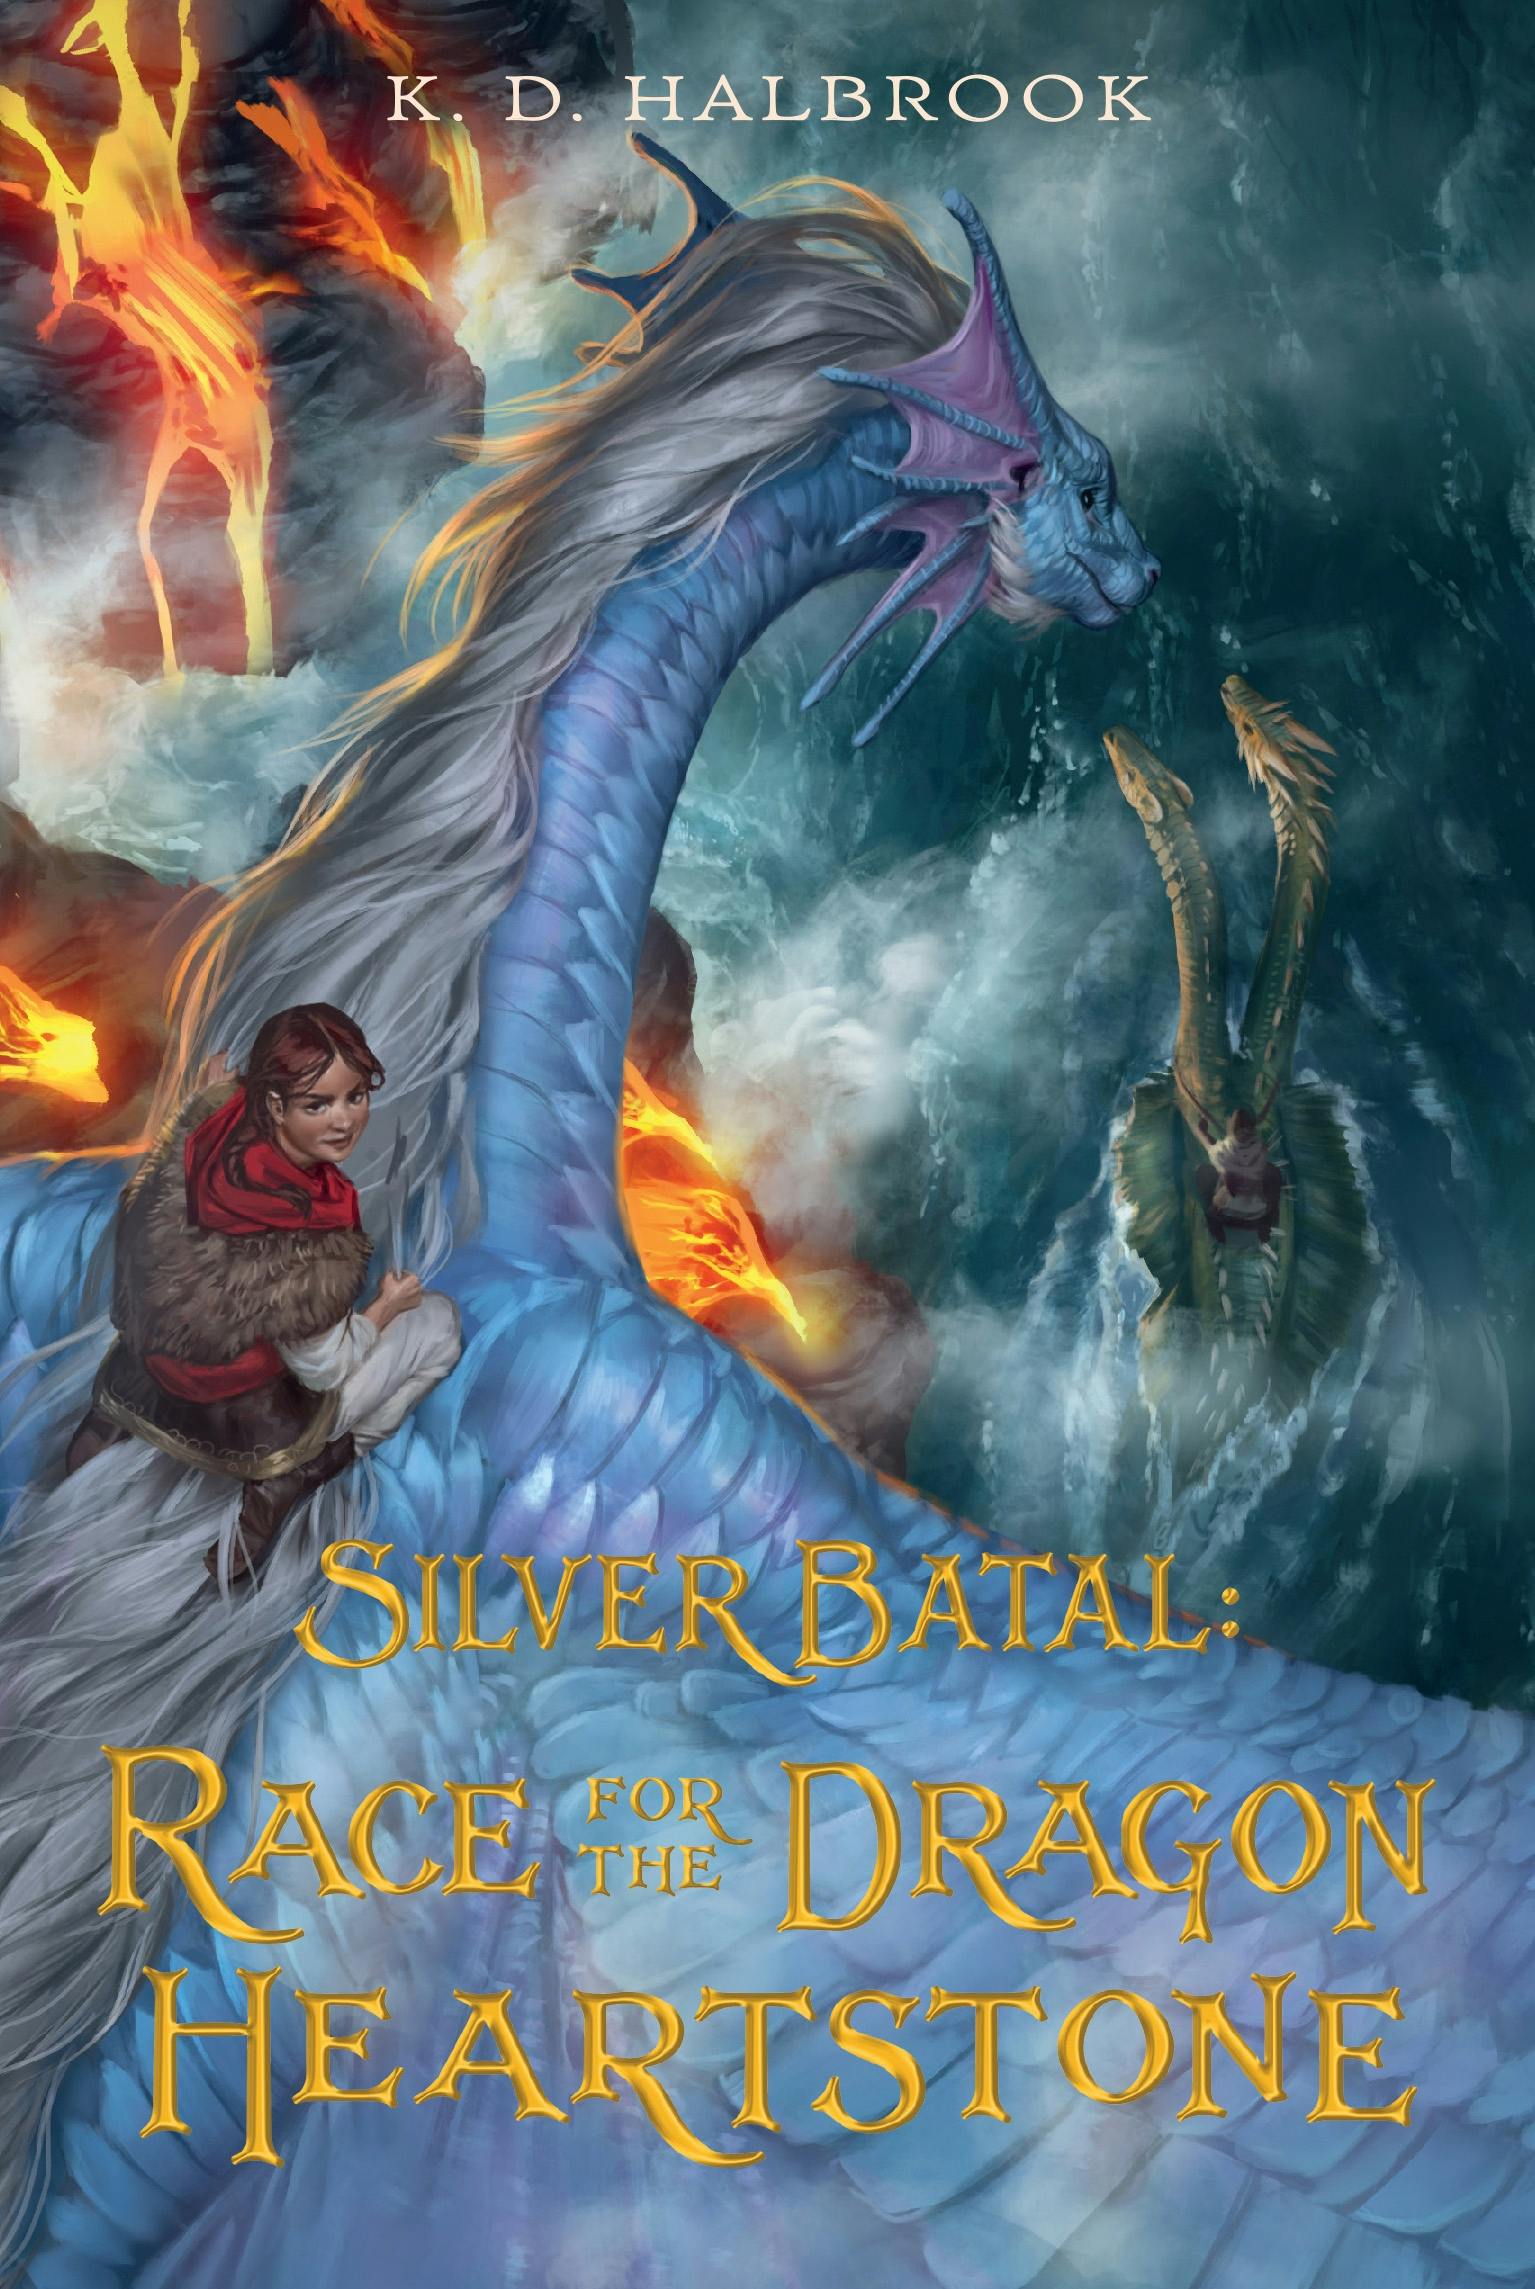 Image of Silver Batal: Race for the Dragon Heartstone